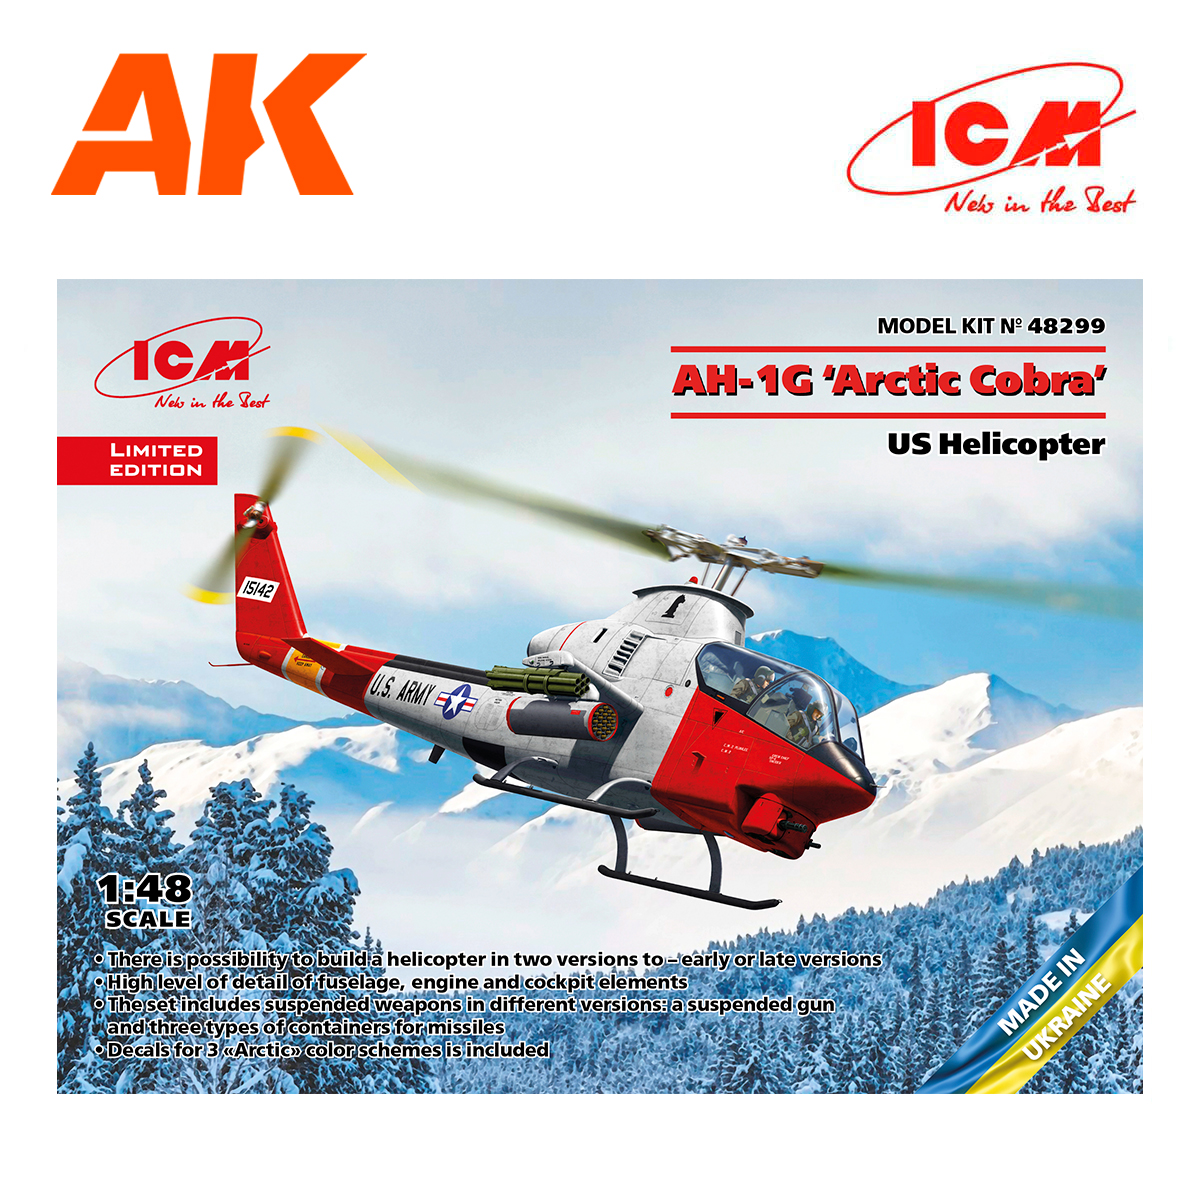 AH-1G ‘Arctic Cobra’, US Helicopter 1/48